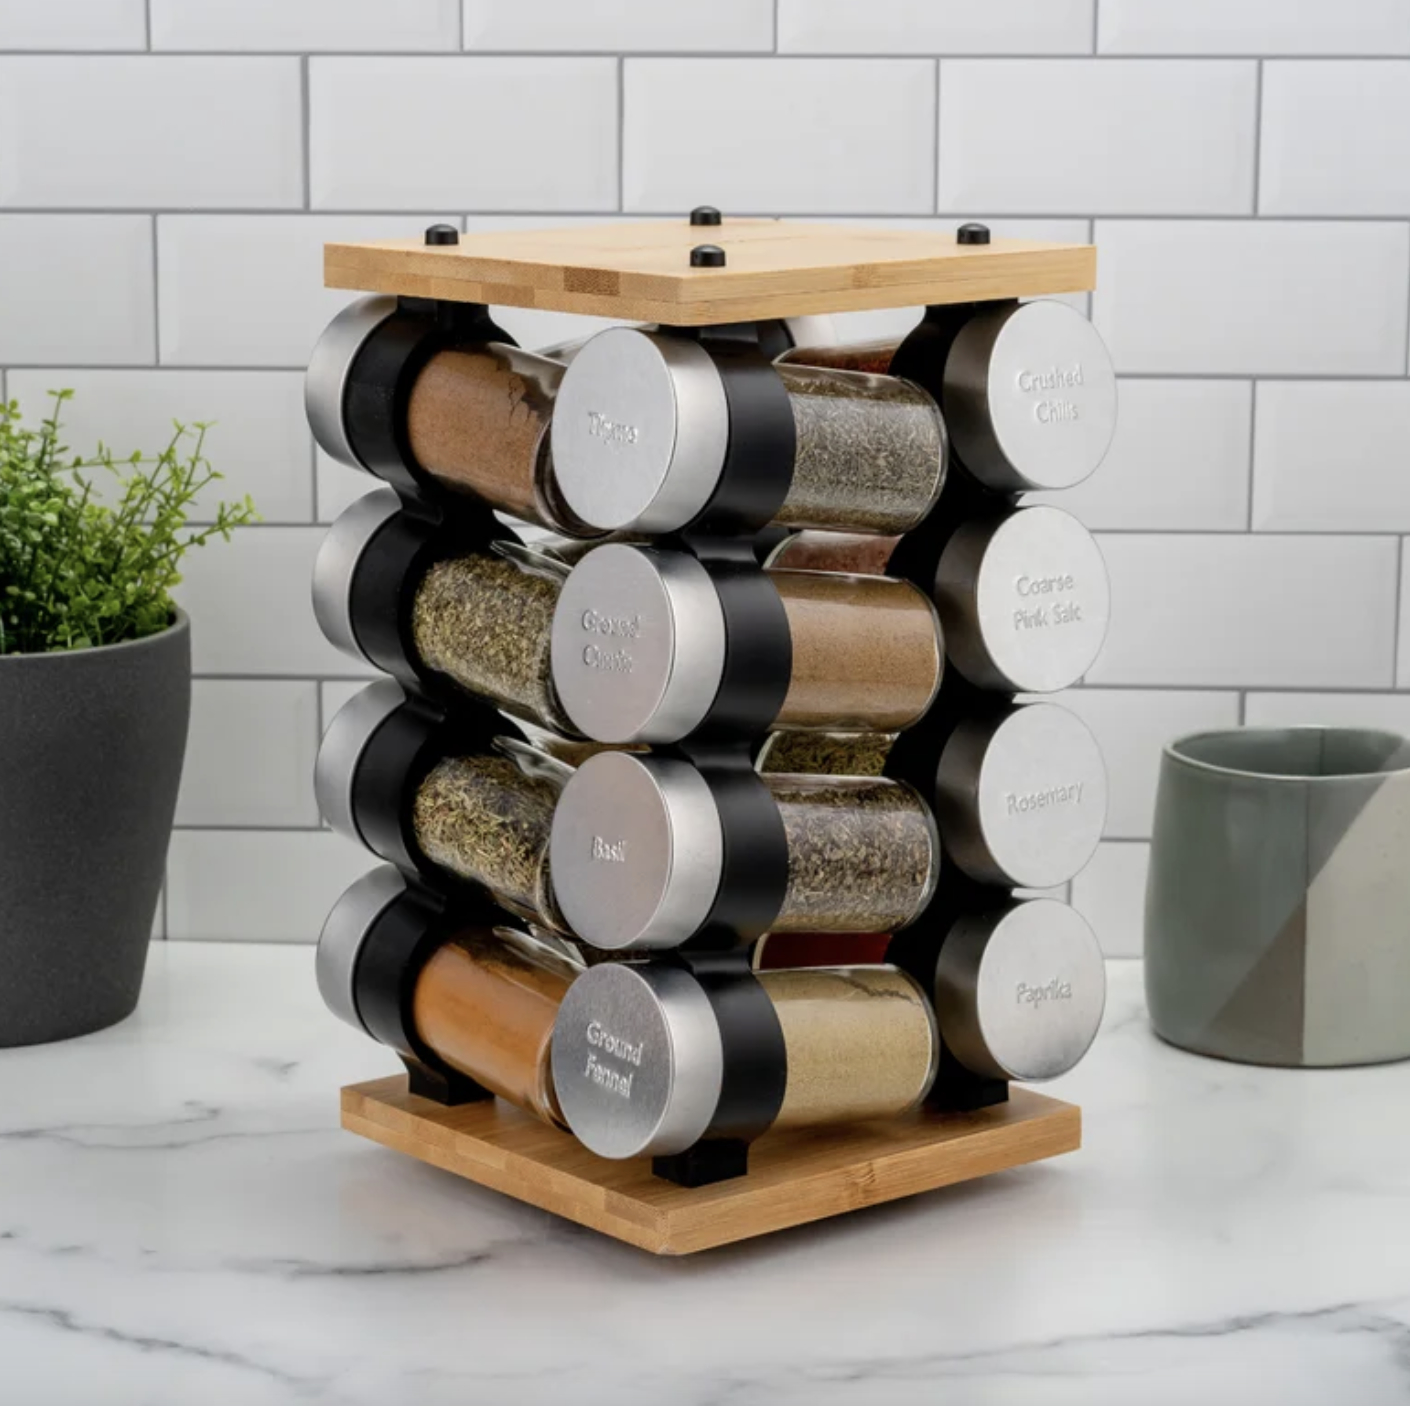 A wooden spice rack on a counter.